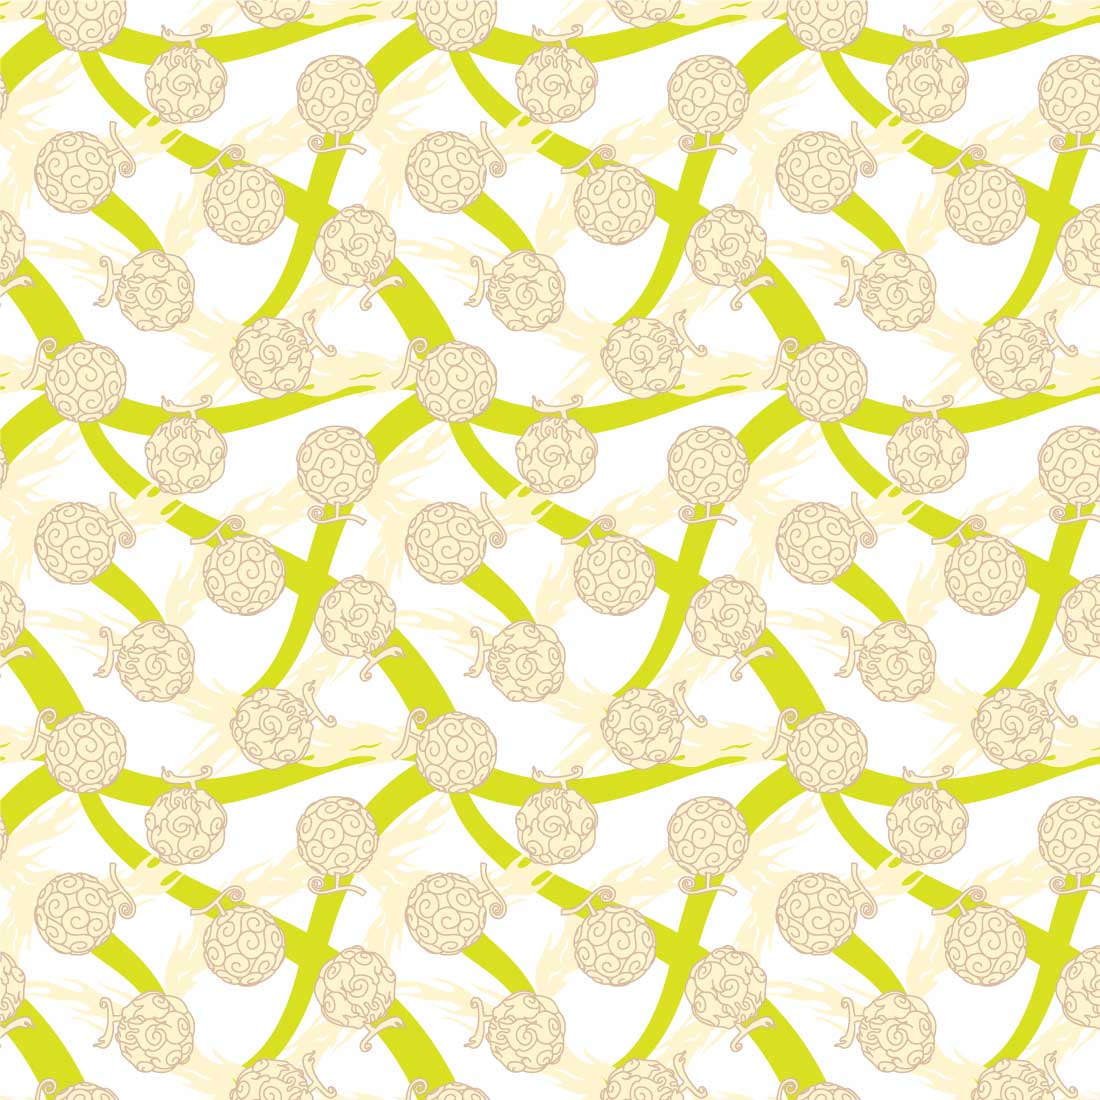 Light Leaf Hand Drawn Seamless Pattern Pro Vector cover image.